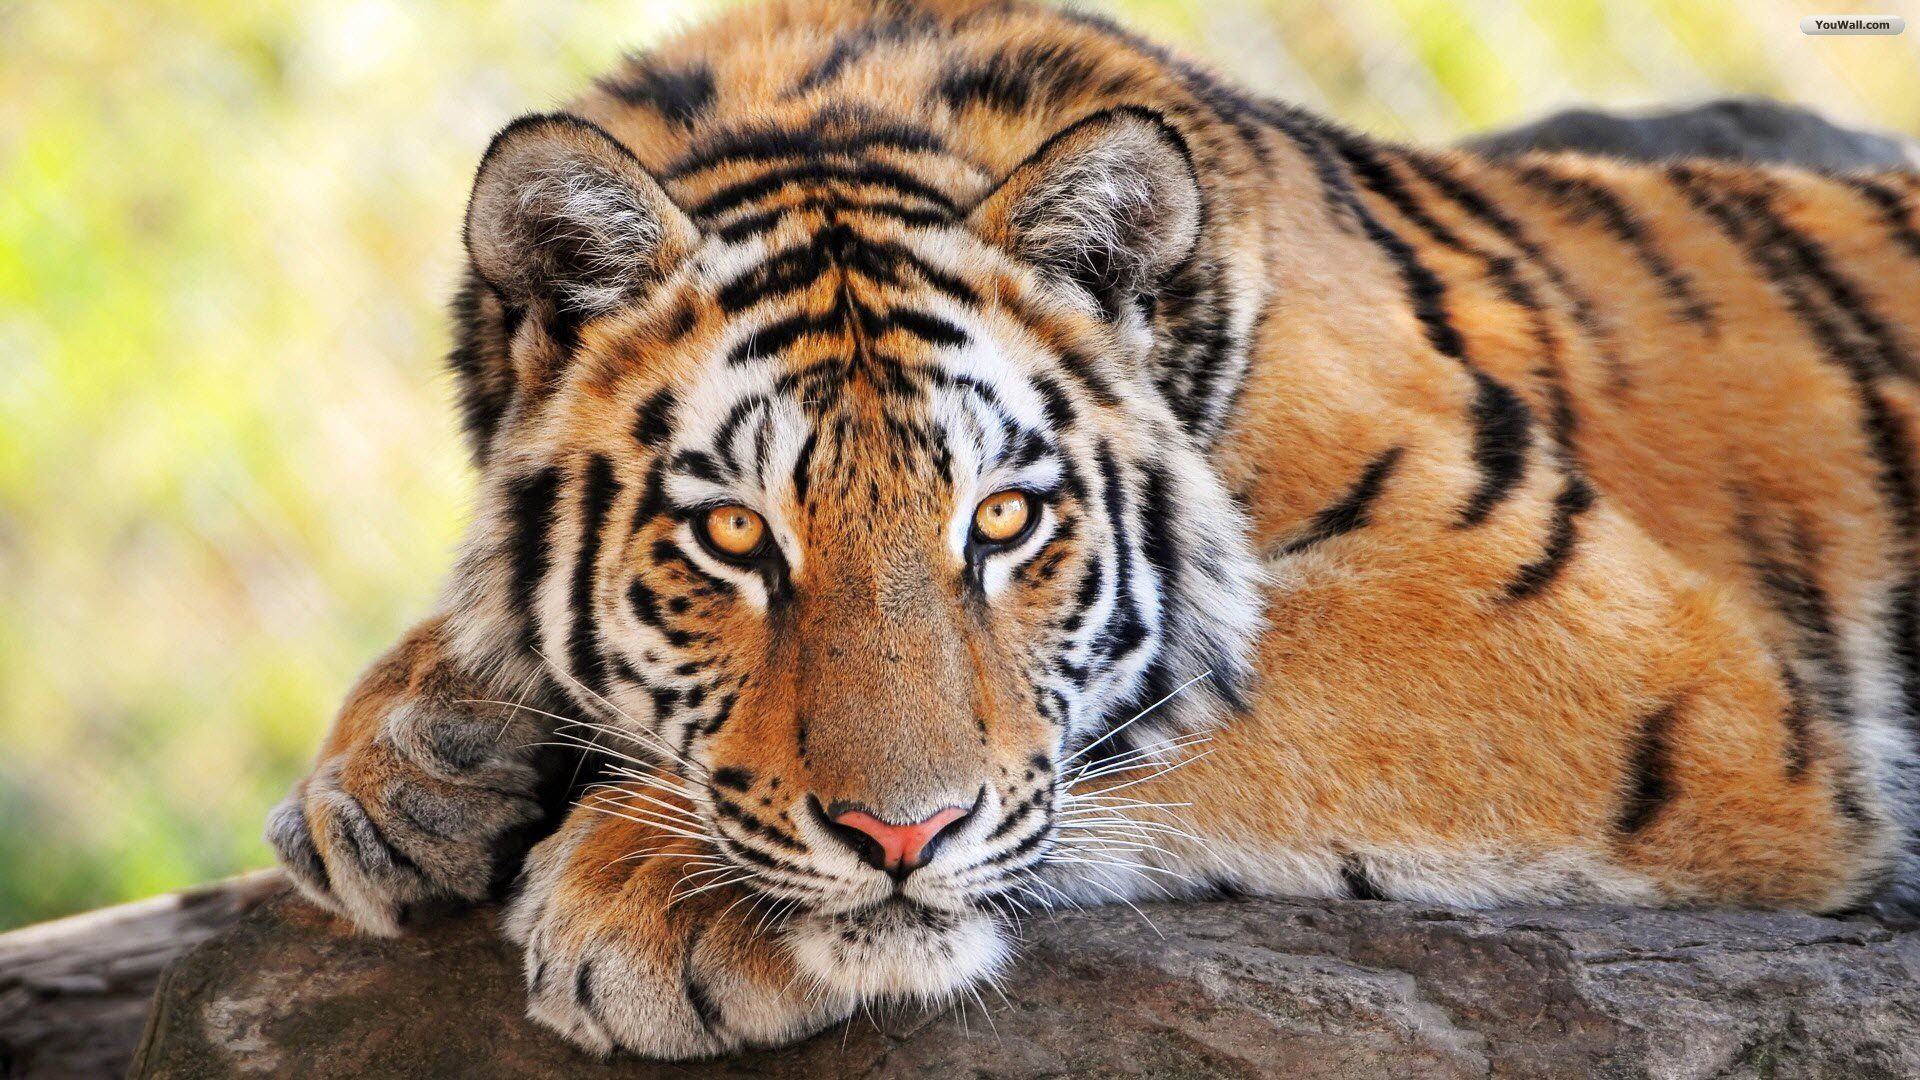 YouWall - Gorgeous Tiger Wallpaper - wallpaper,wallpapers,free ...